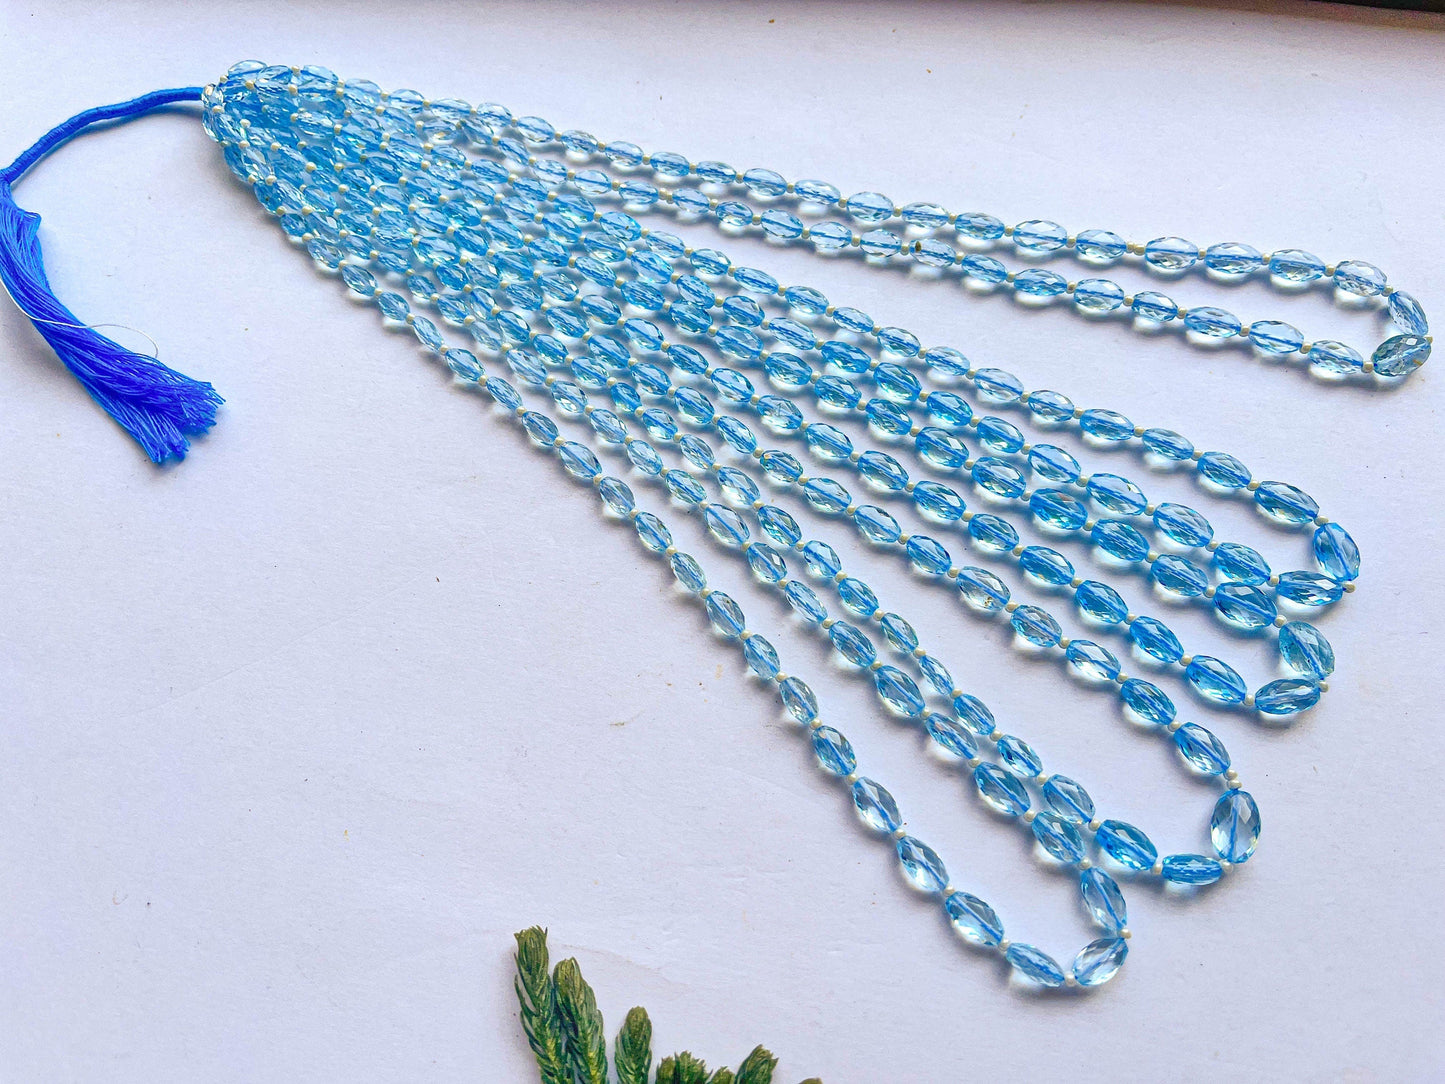 16 Inch BLUE TOPAZ Barrel Shape Faceted Beads, Natural Blue Topaz beads, Blue Topaz For jewelry, Blue Topaz Gemstone Beads, 5x7mm to 7x9mm Beadsforyourjewelry